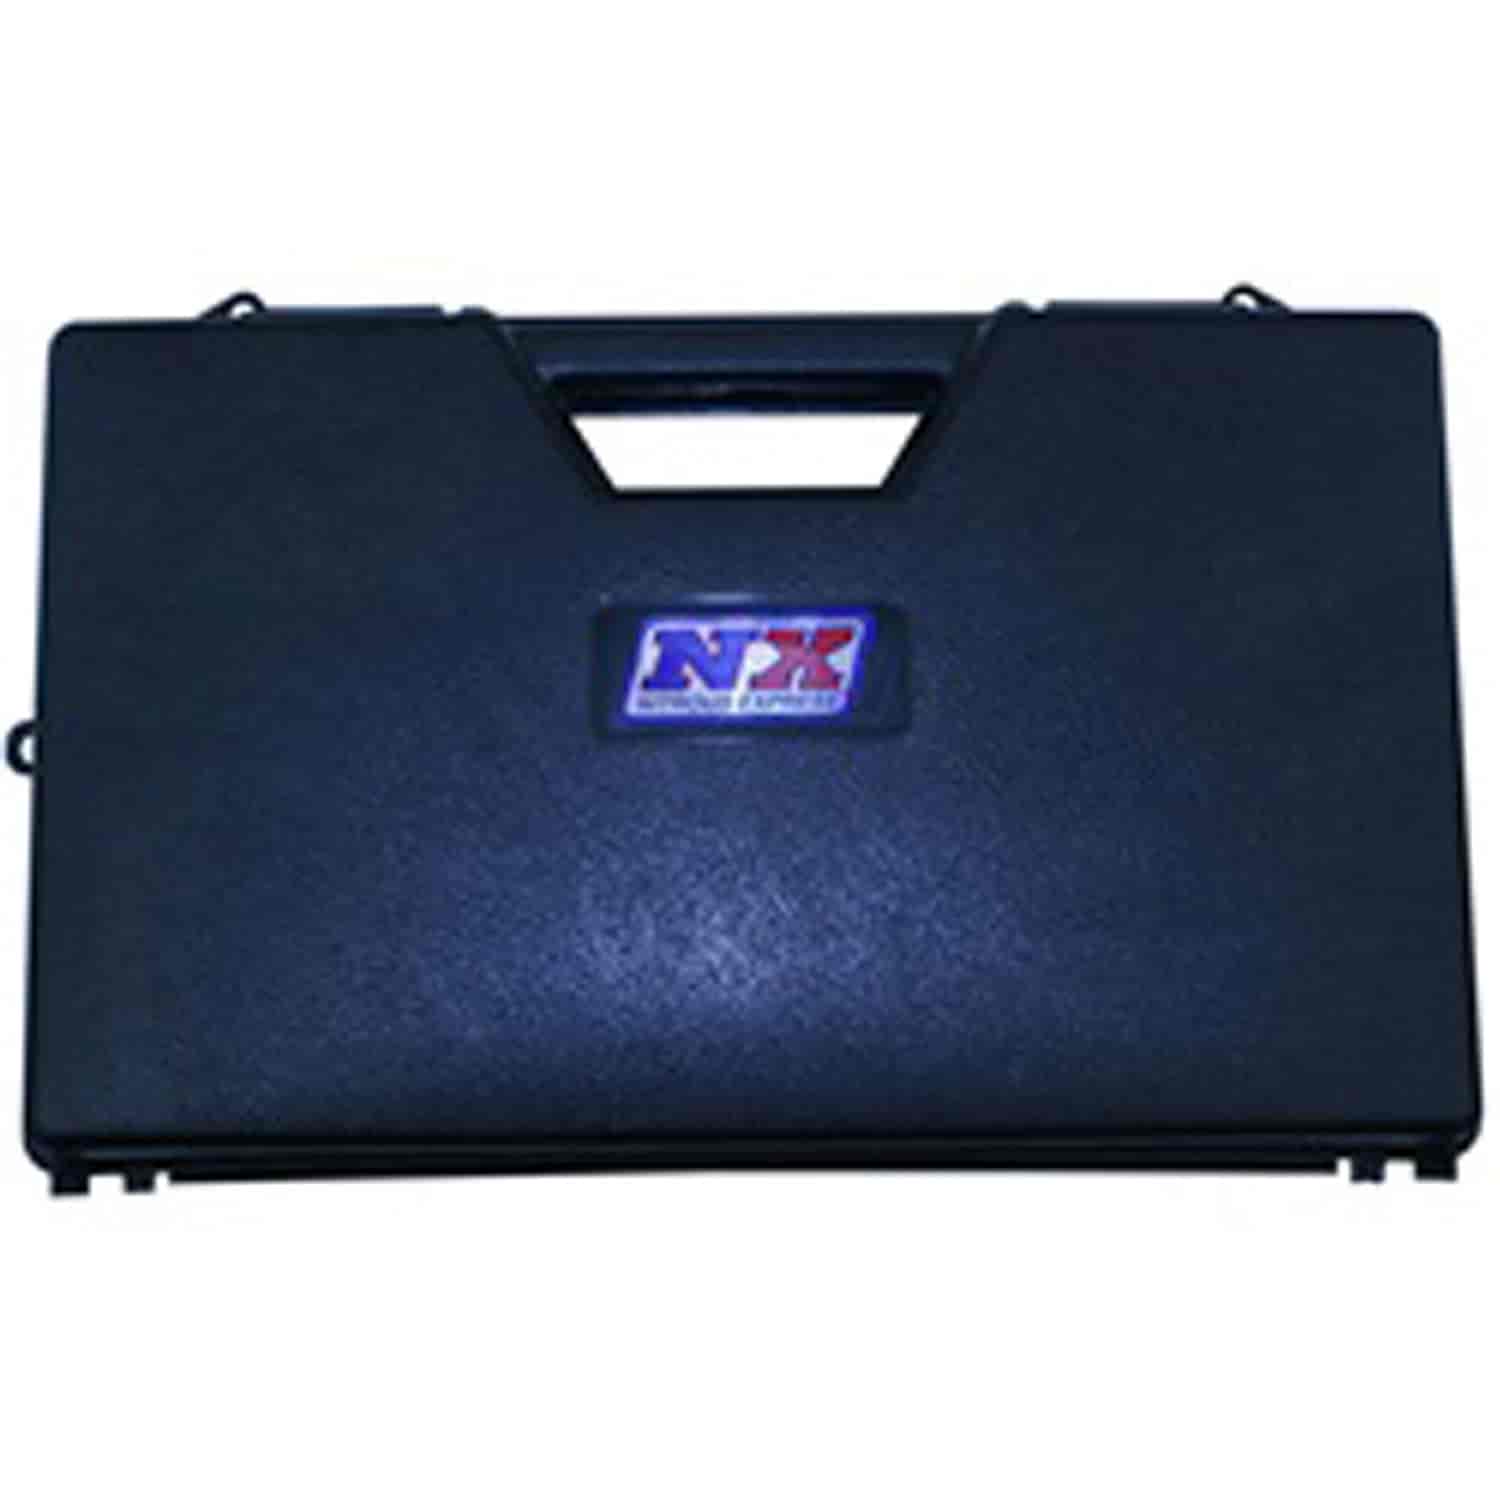 MOLDED CARRYING CASE FOR MASTER FLOW CHECK